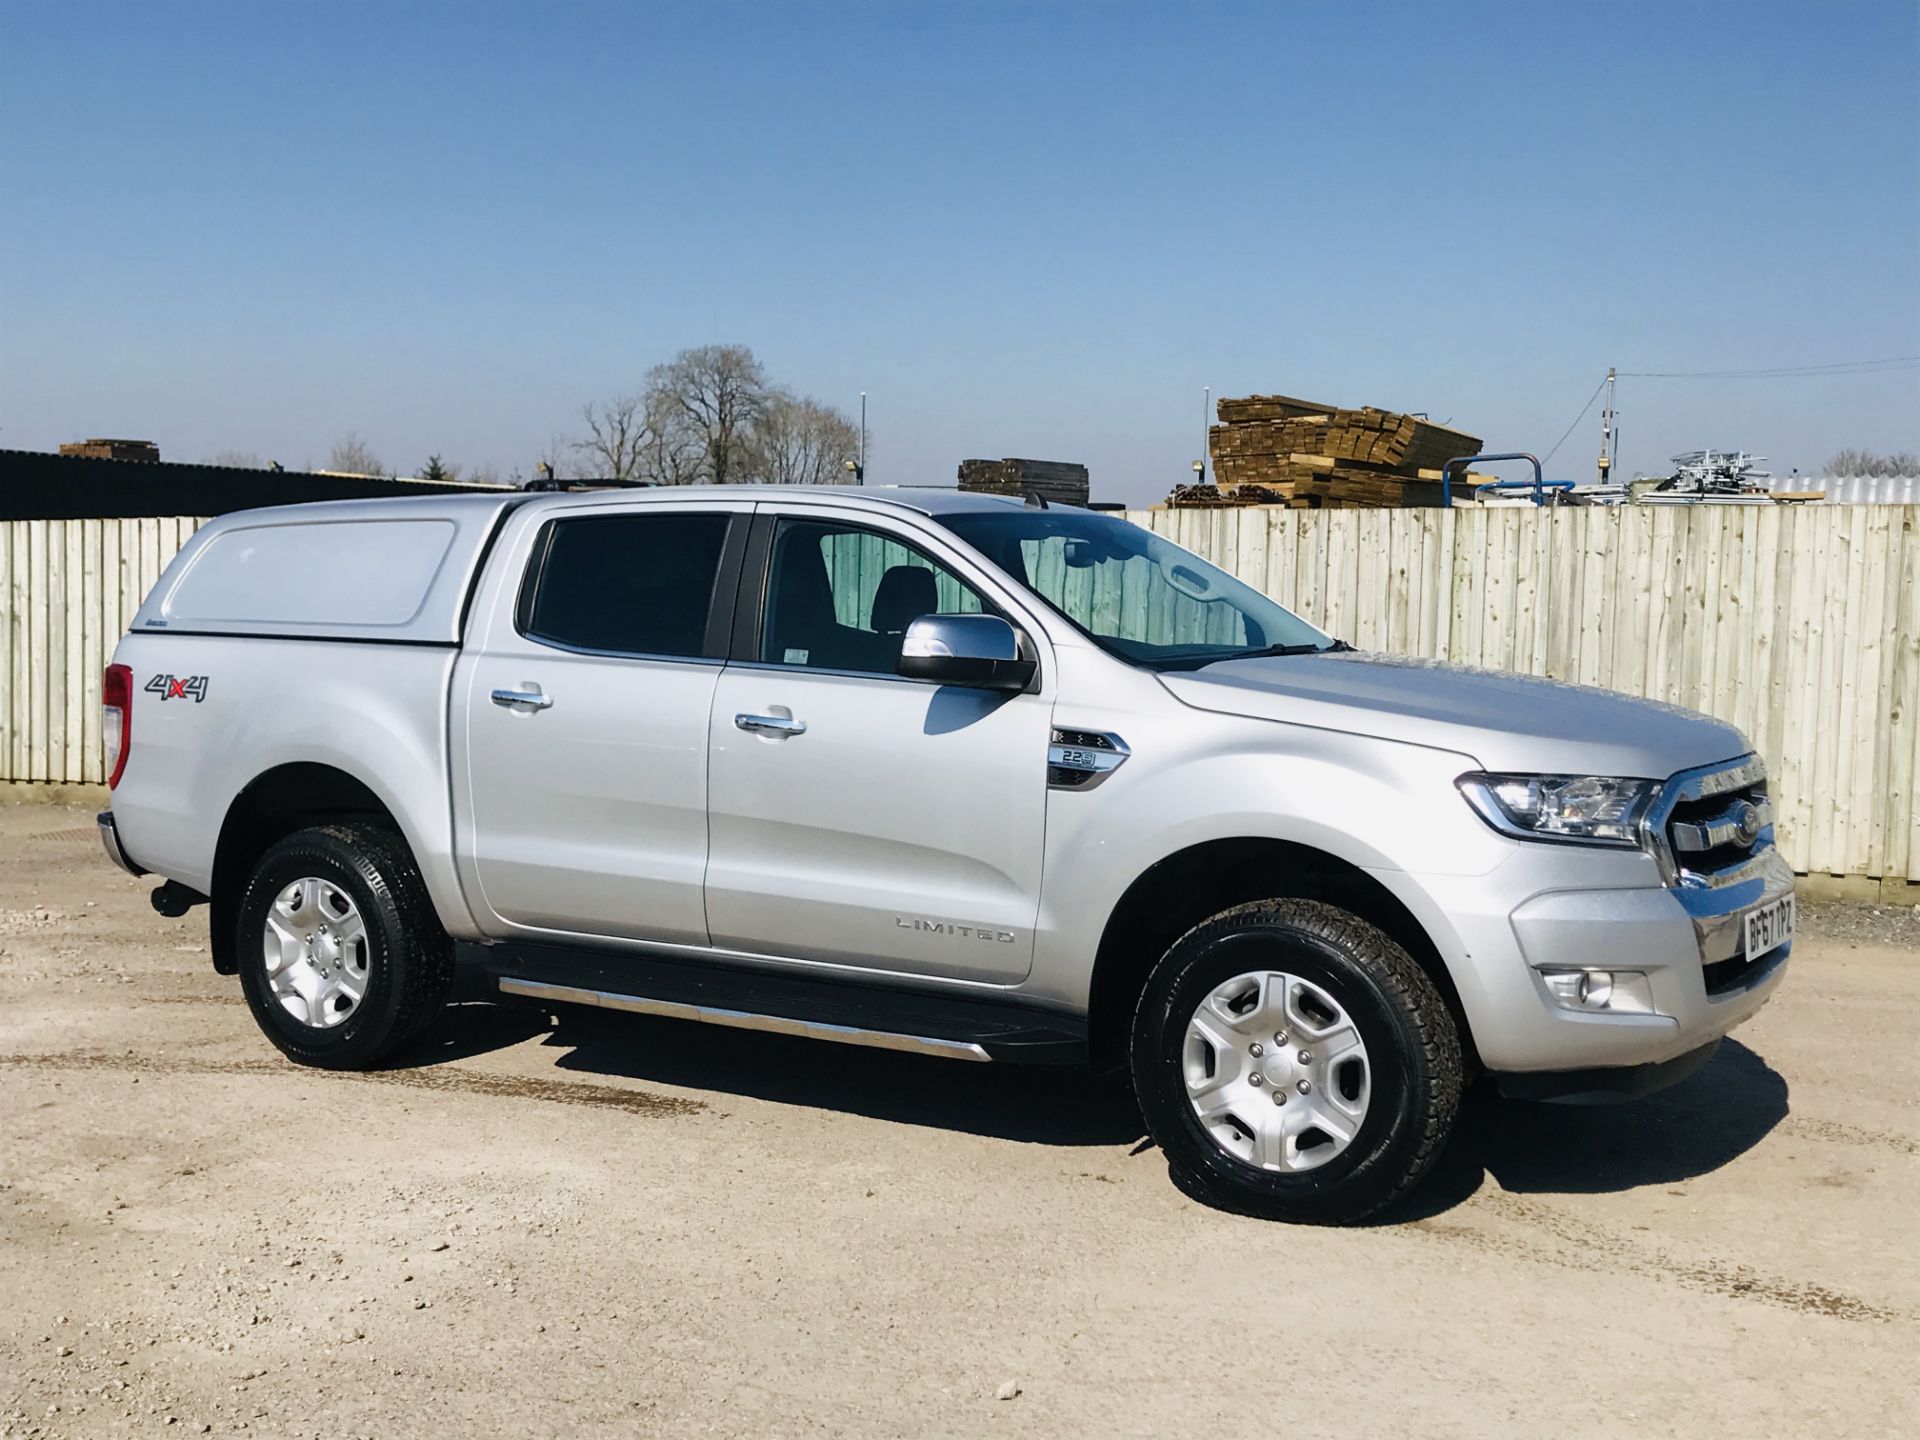 On Sale FORD RANGER "LIMITED" TDCI "AUTO" DOUBLE/CAB 4X4 - (2018 MODEL) 1 OWNER - HUGE SPEC - LOOK